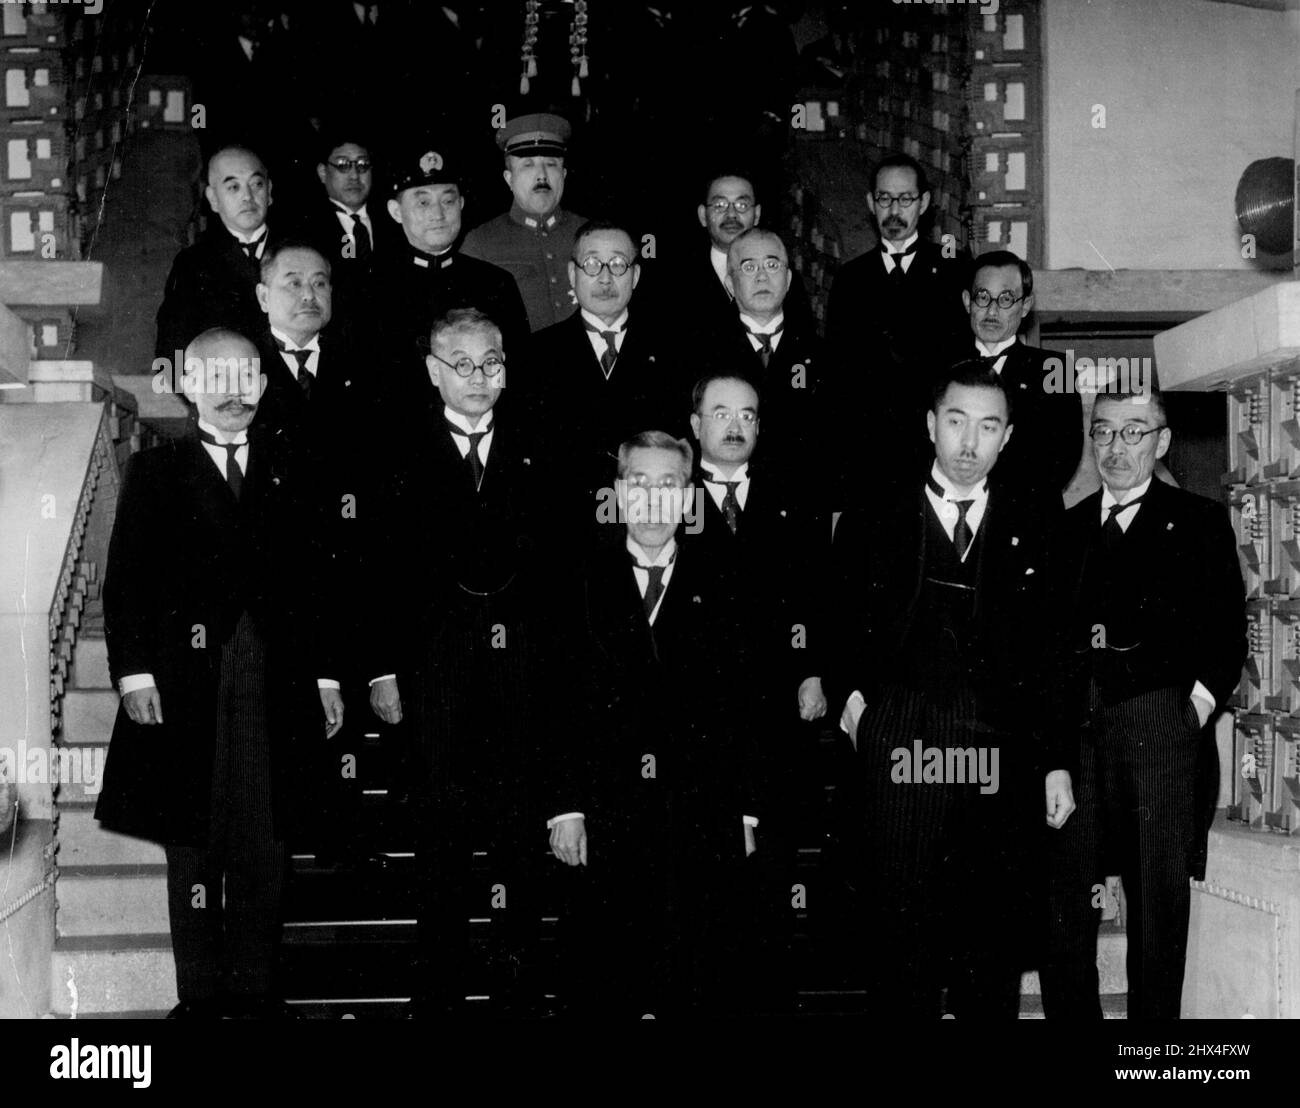 Baron Kiichiro Hiranuma Heads New Cabinet Of Japan -- The first photograph taken of the new cabinet of Japan, headed by Premier Baron Kiichiro Hiranuma, which came into existence this evening at 7:30 o'clock with the investiture of its members by the Emperor, following the resignation of the Konoye Cabinet on the morning of January 4th. Its first meeting was held at 8:15 o'clock, at the Premier's official residence, at which it approved the Premier's statement pledging continuance of the former, Konoye cabinet's policies on the Sino-Japanese affairs.Left to Right: (front row) Baron Kiichiro Hi Stock Photo